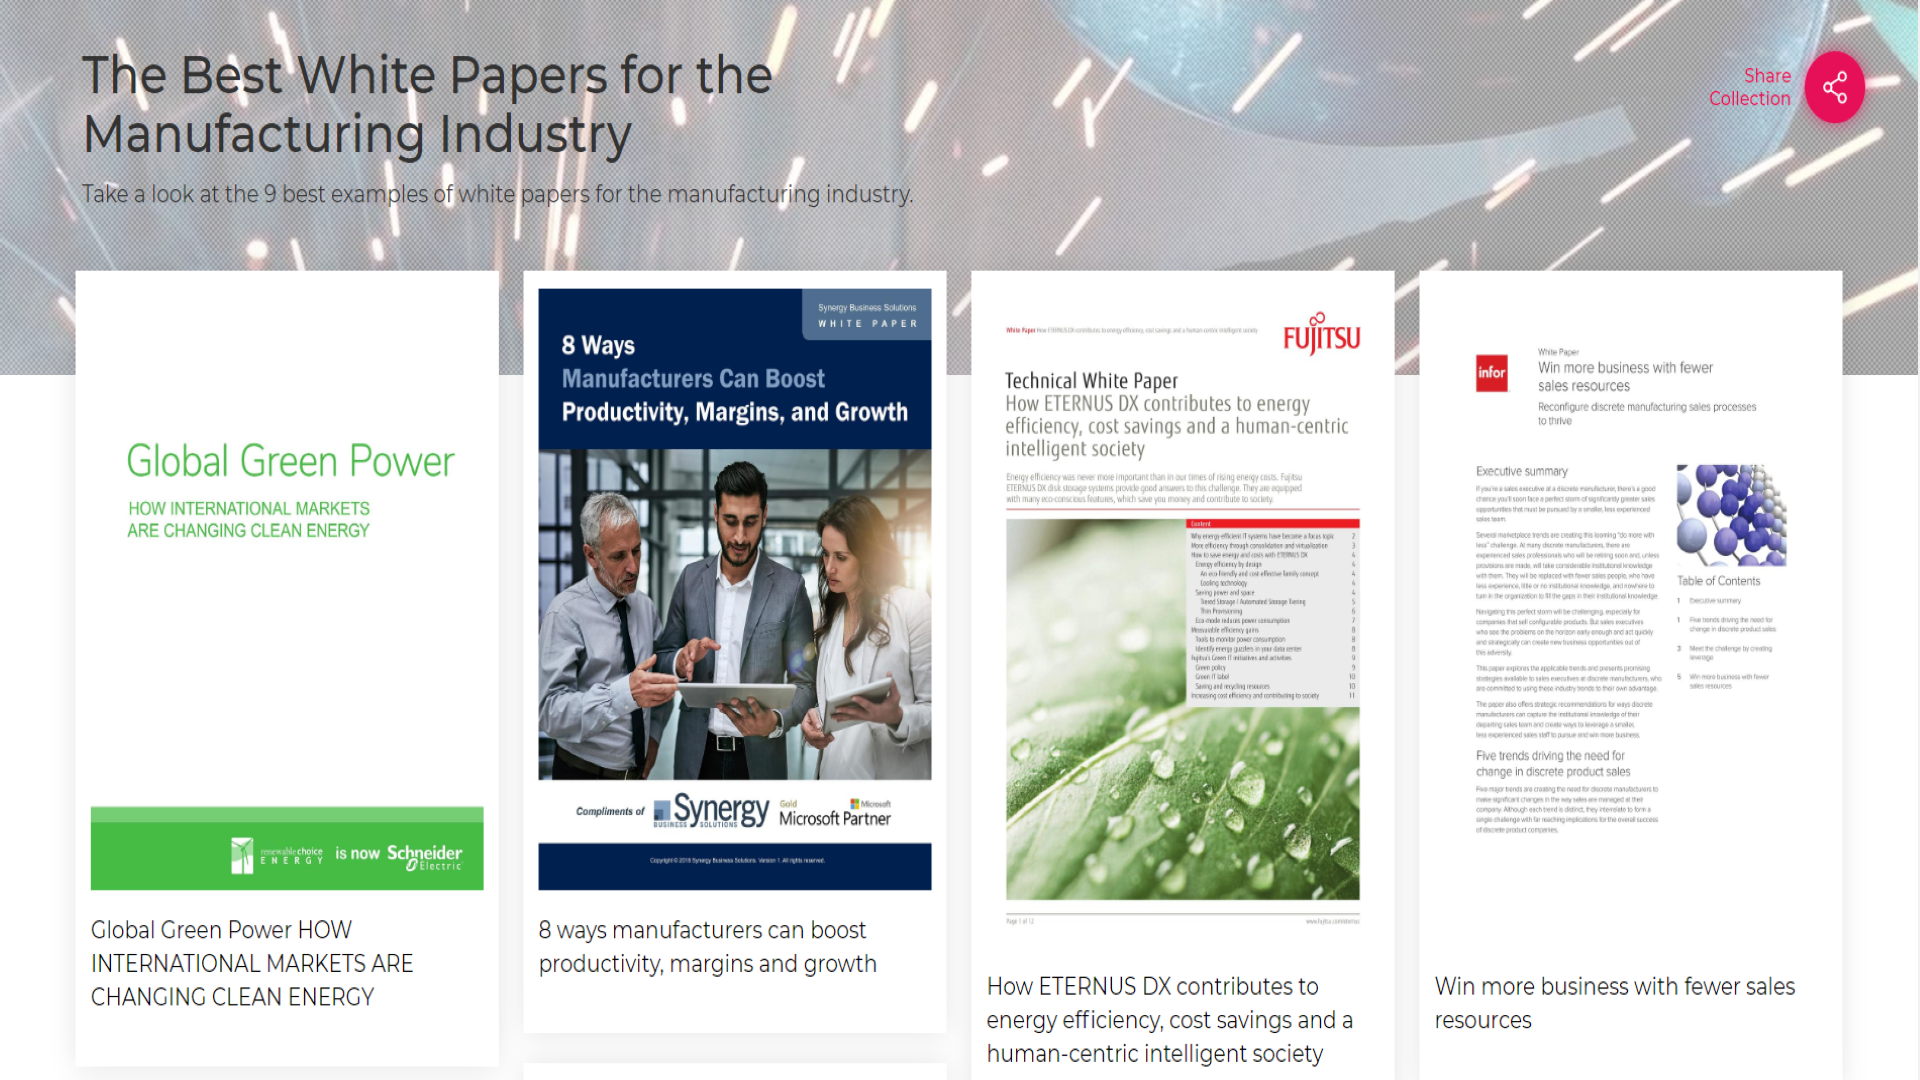 The Best White Papers for the Manufacturing Industry